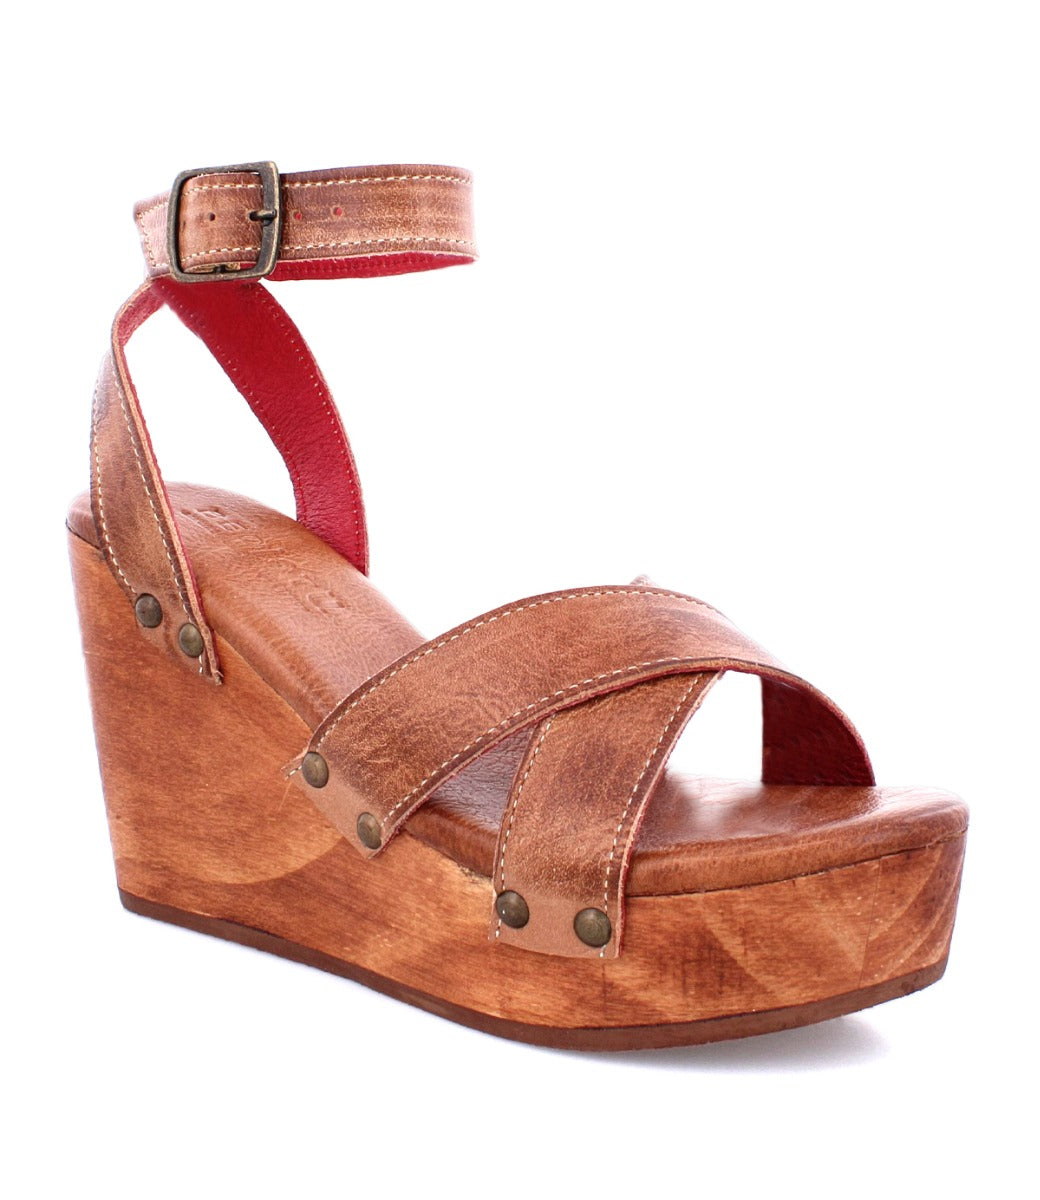 A women's Bed Stu Grettell wooden wedge sandal with straps.